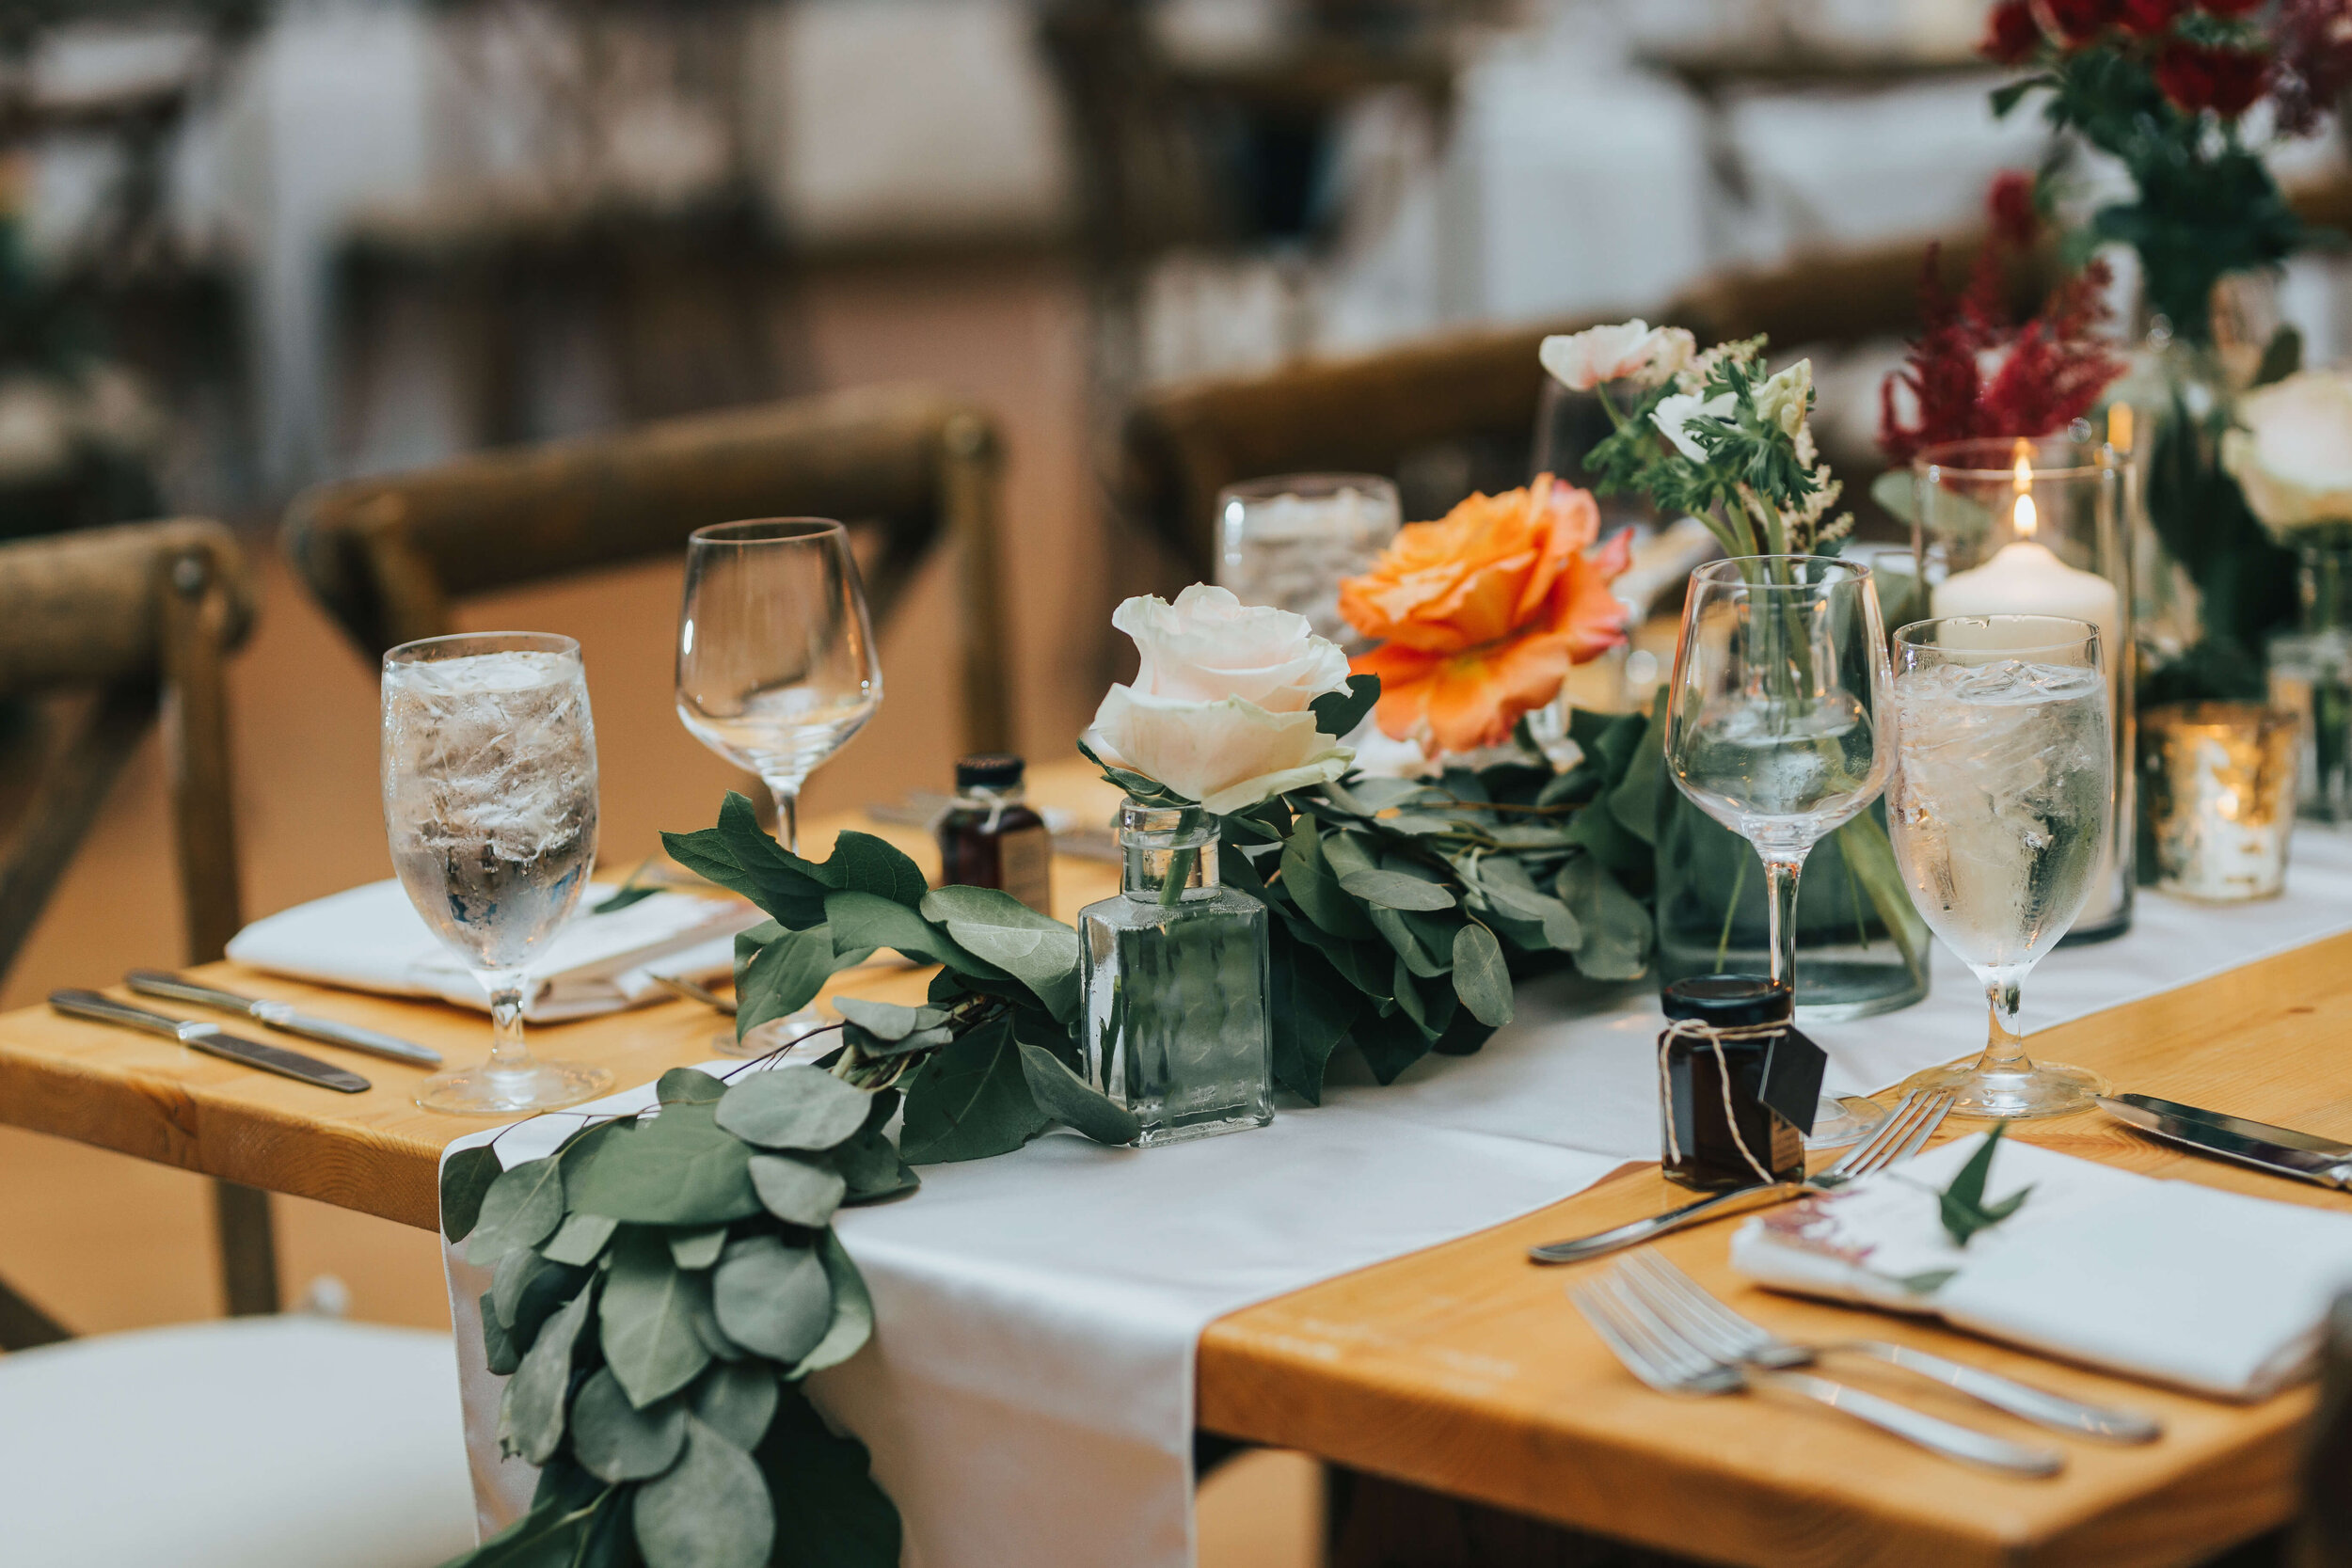 Where to Find Pretty and Affordable Wedding Supplies Online that Fit Any  Budget 